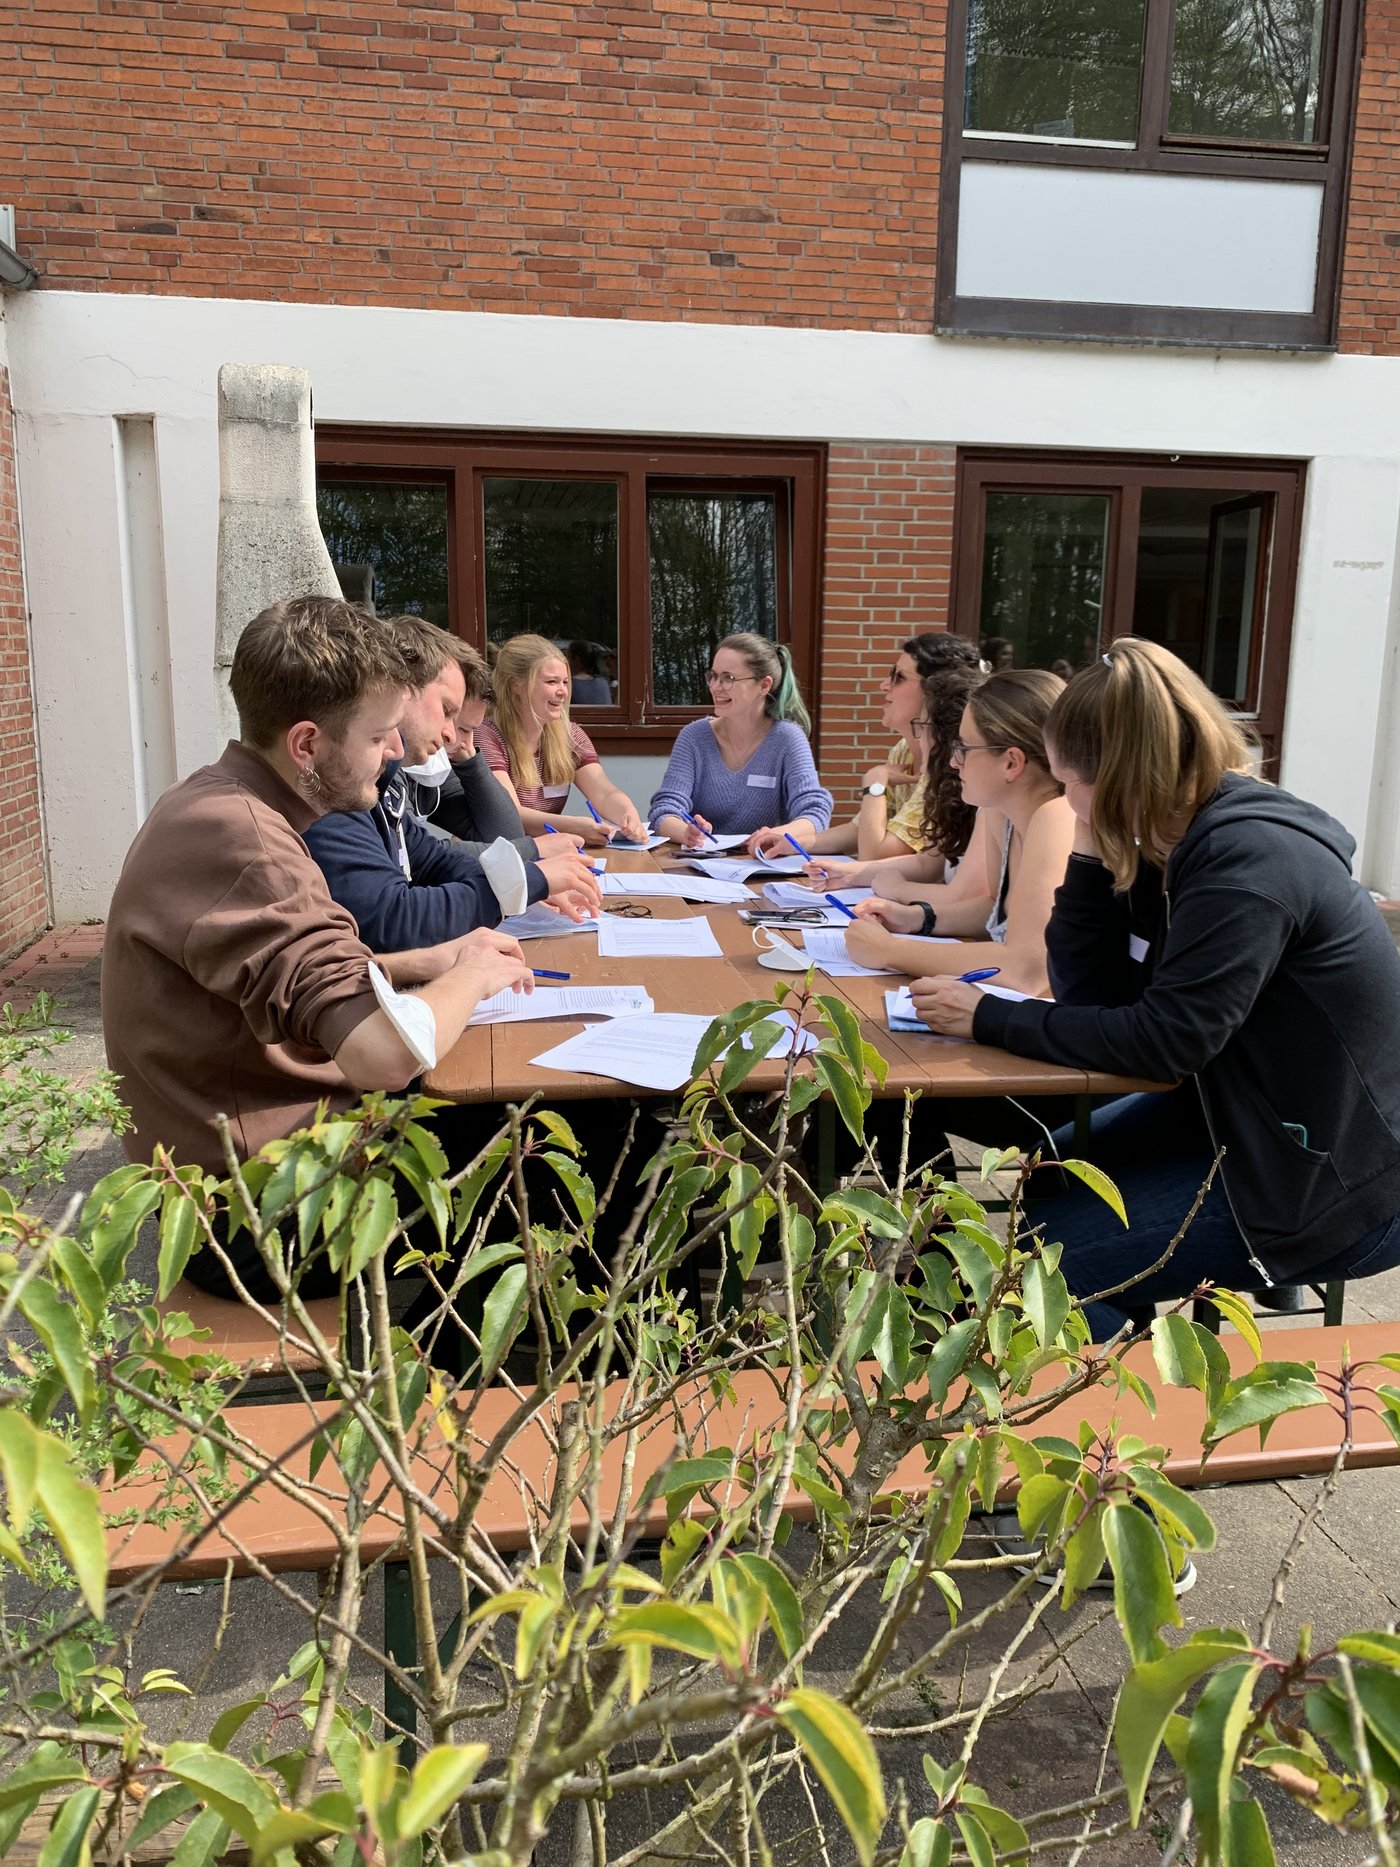 Participants of the LCI Summer School Workshop are seen working at a table in the garden.